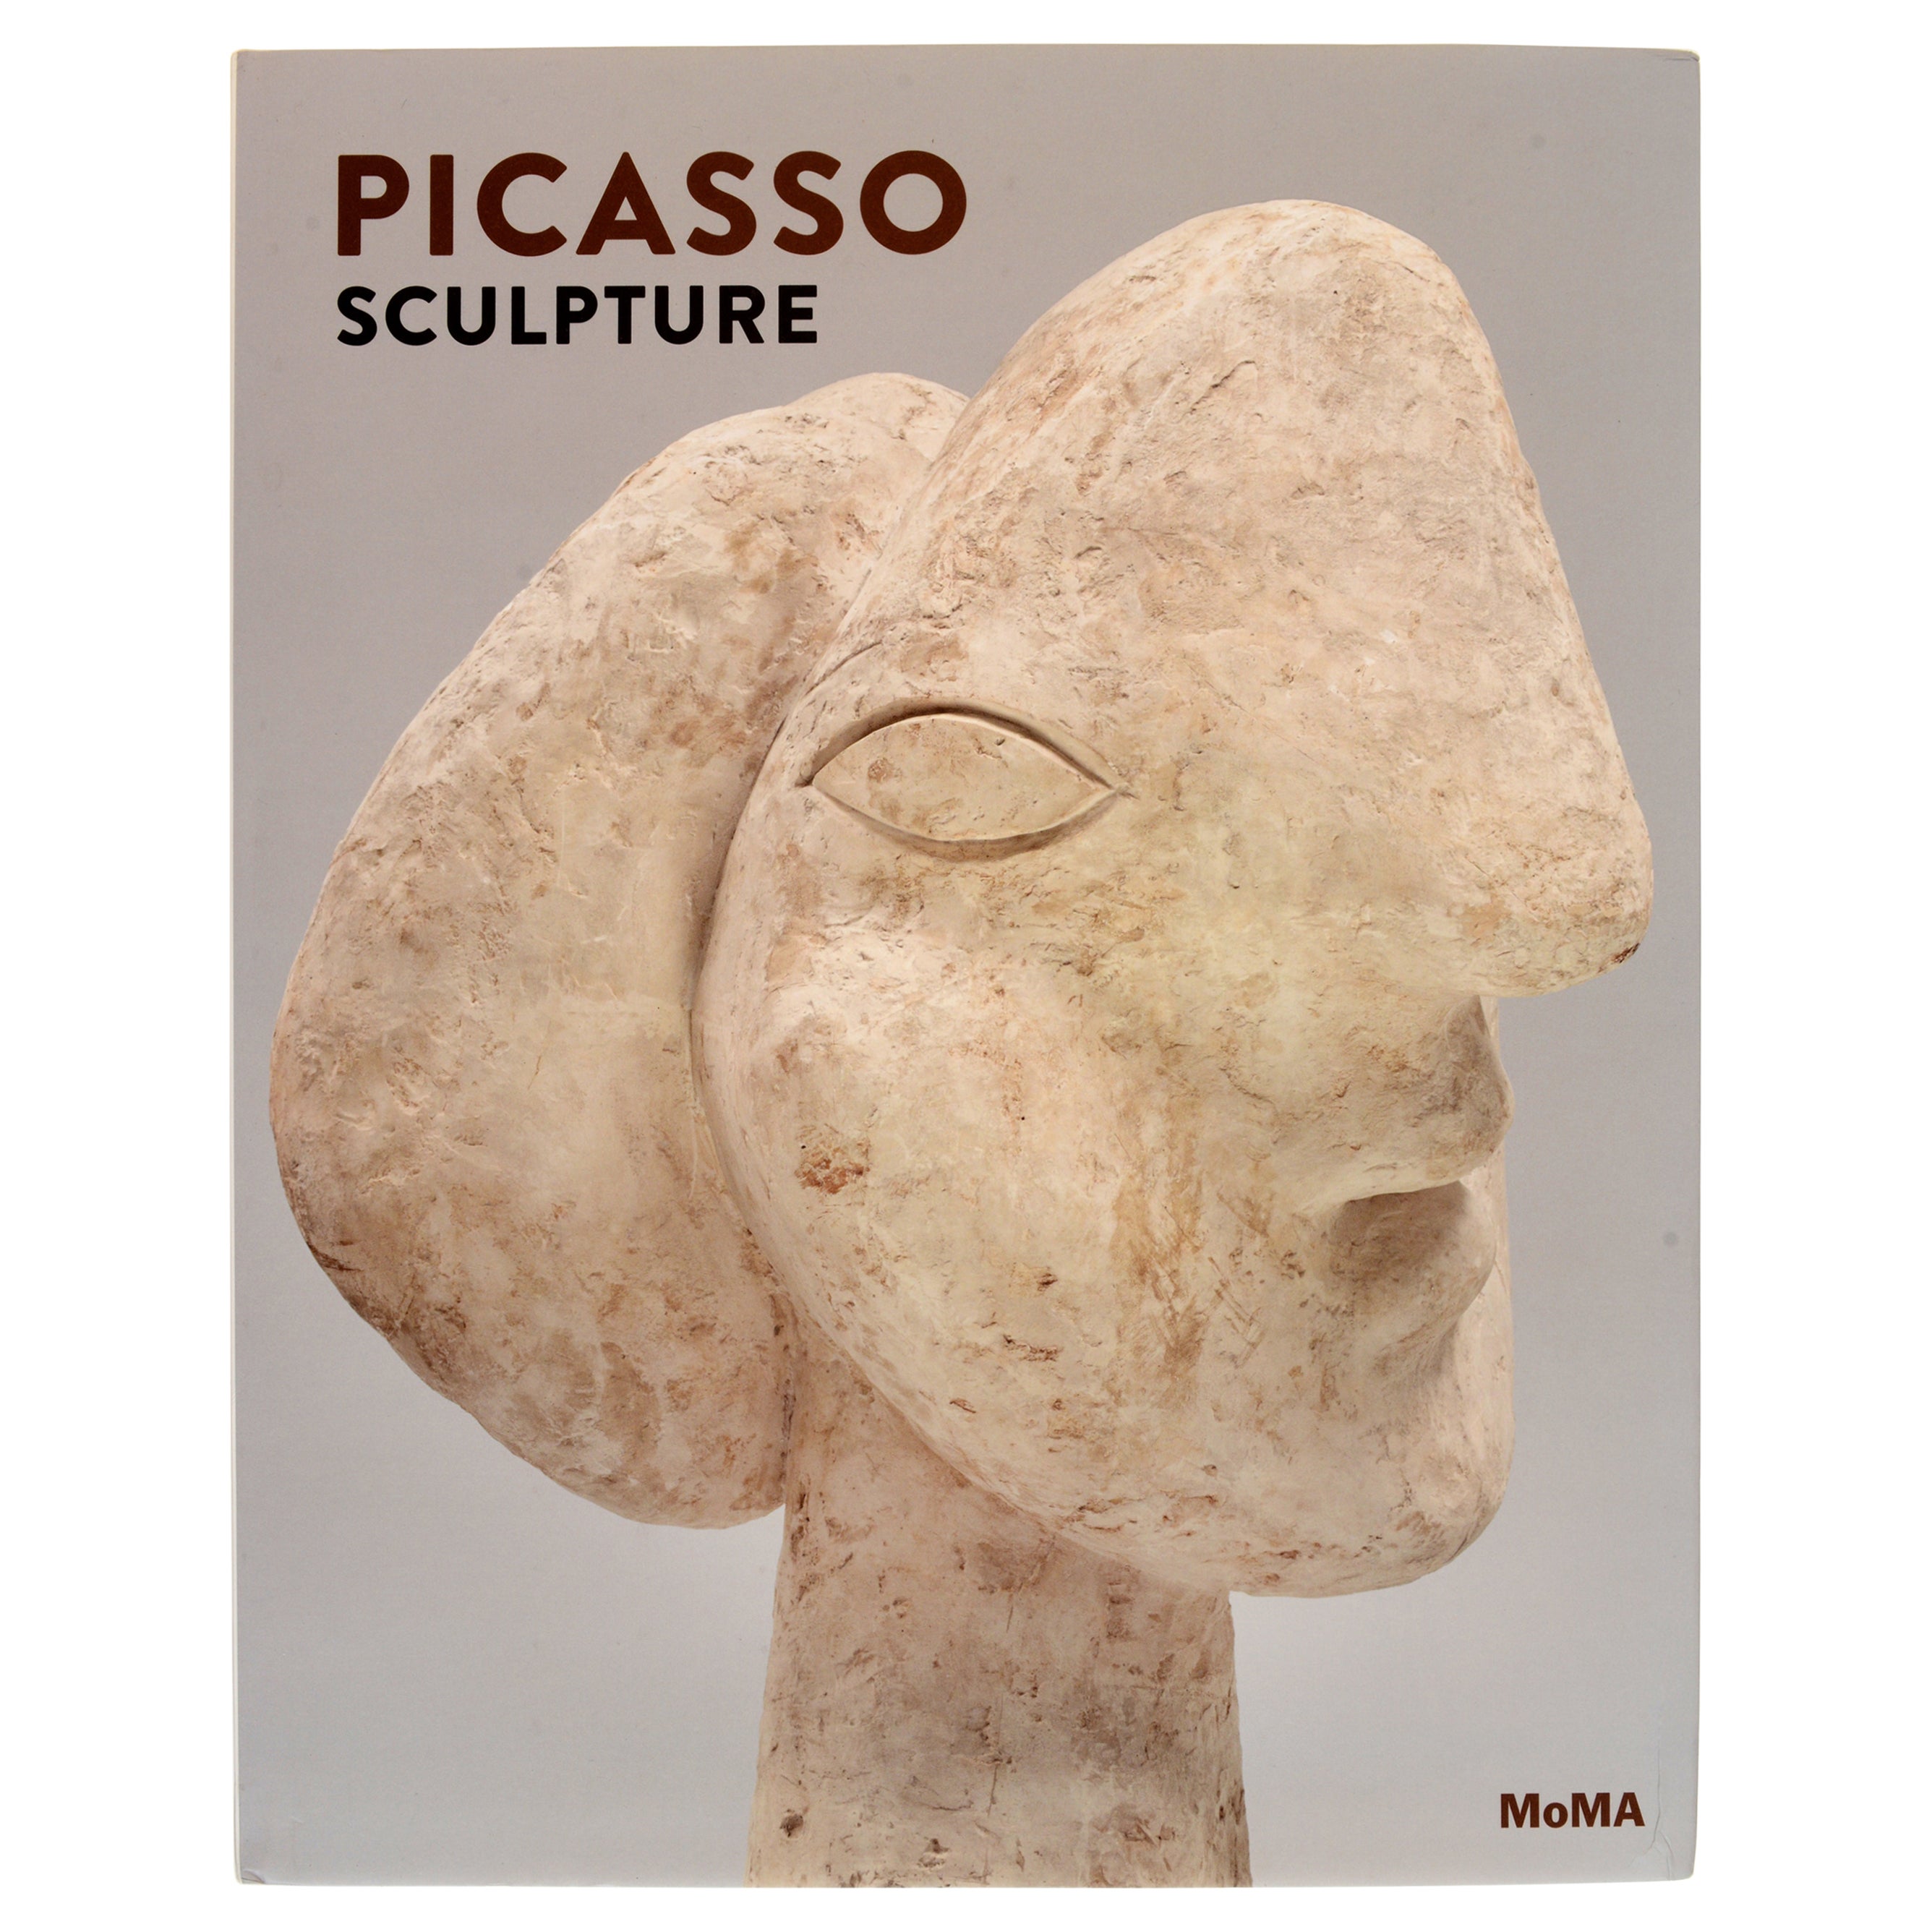 Picasso Sculpture by Luise Mahler, Virginie Perdrisot & Rebecca Lowery, 1st Ed